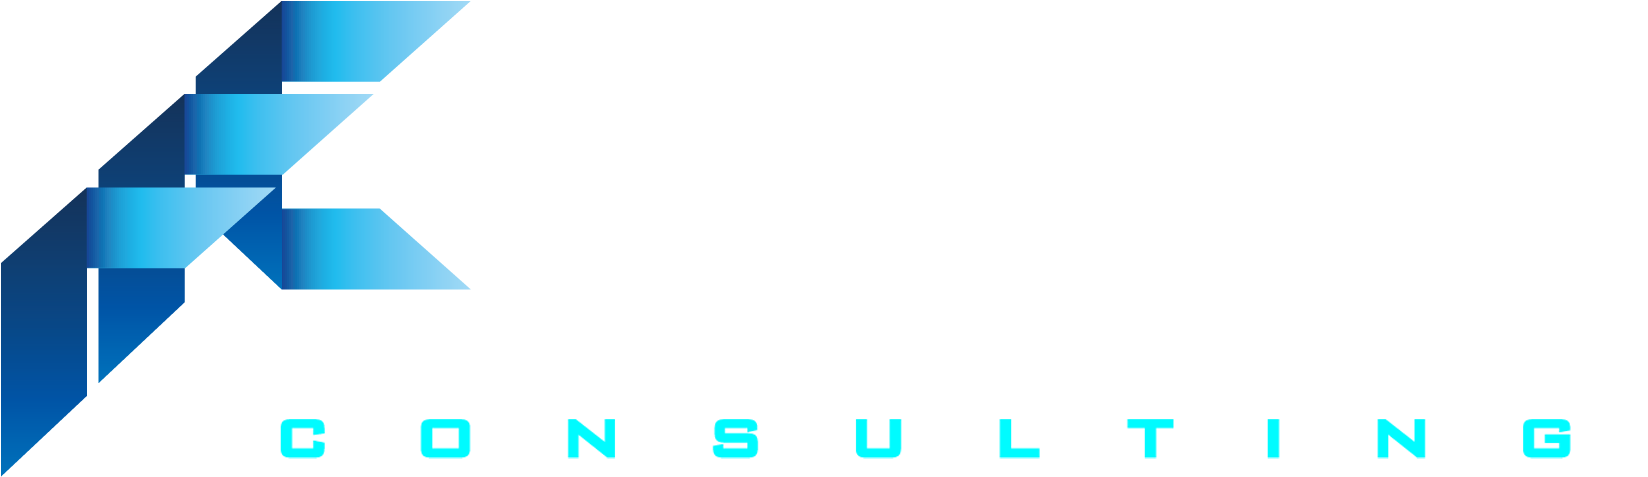 Taylor It Consulting - Information Technology (1662x519)